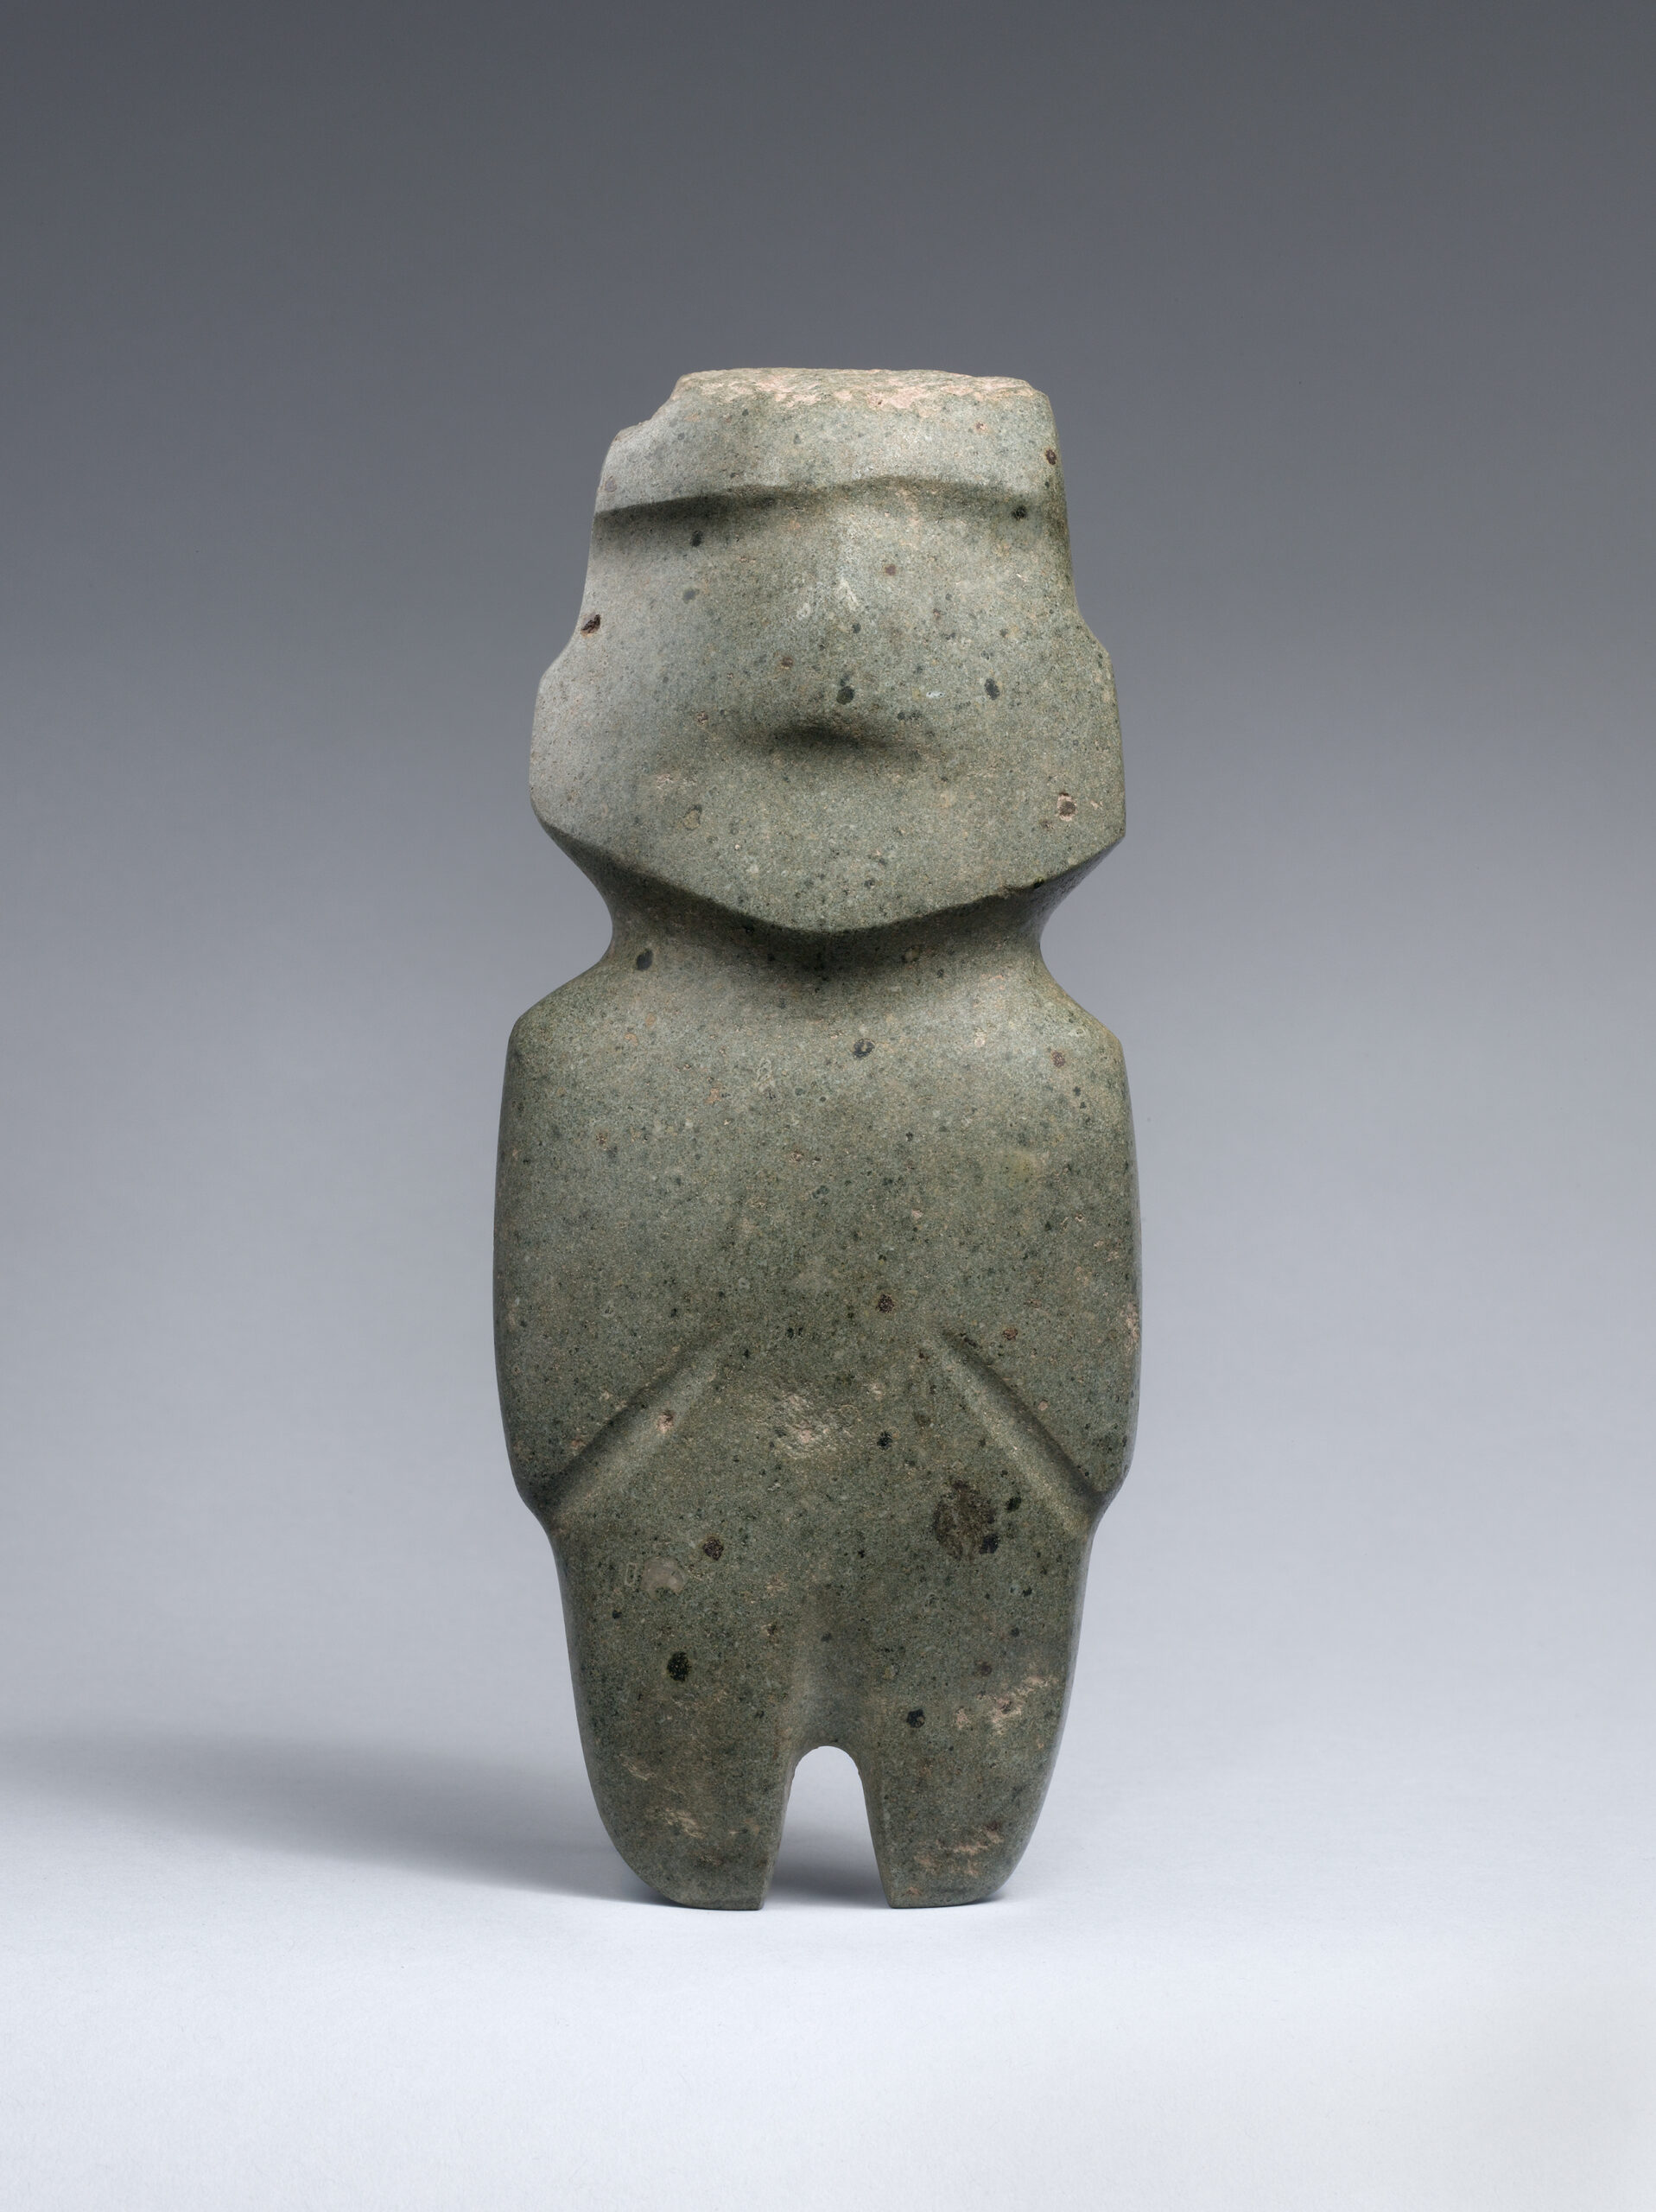 Small abstract stone carving of a standing human figure.